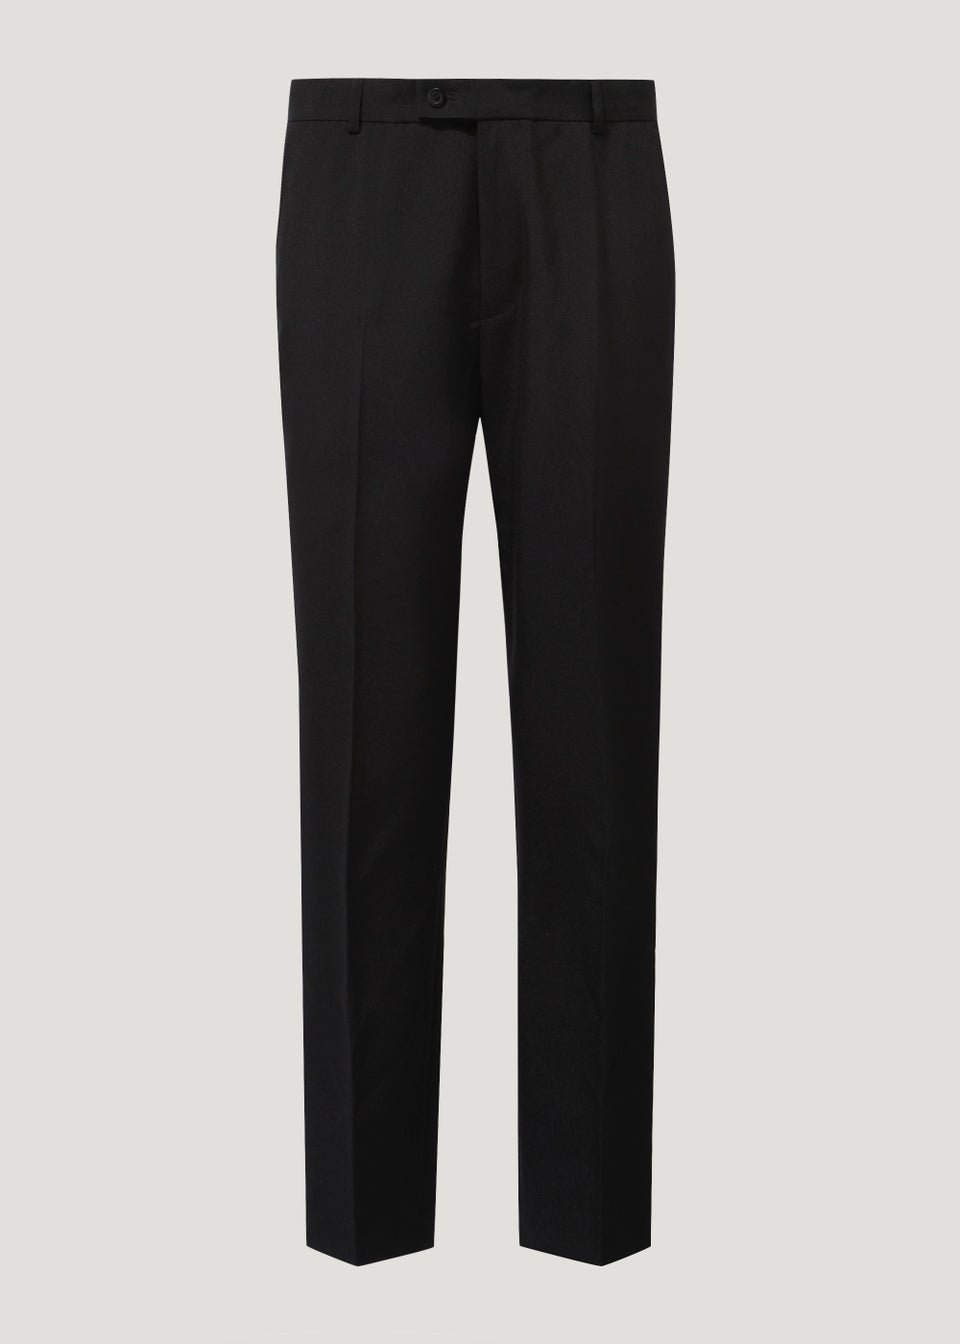 Buy Men's Formal Trousers at Lowest Price in Bahrain - bfab